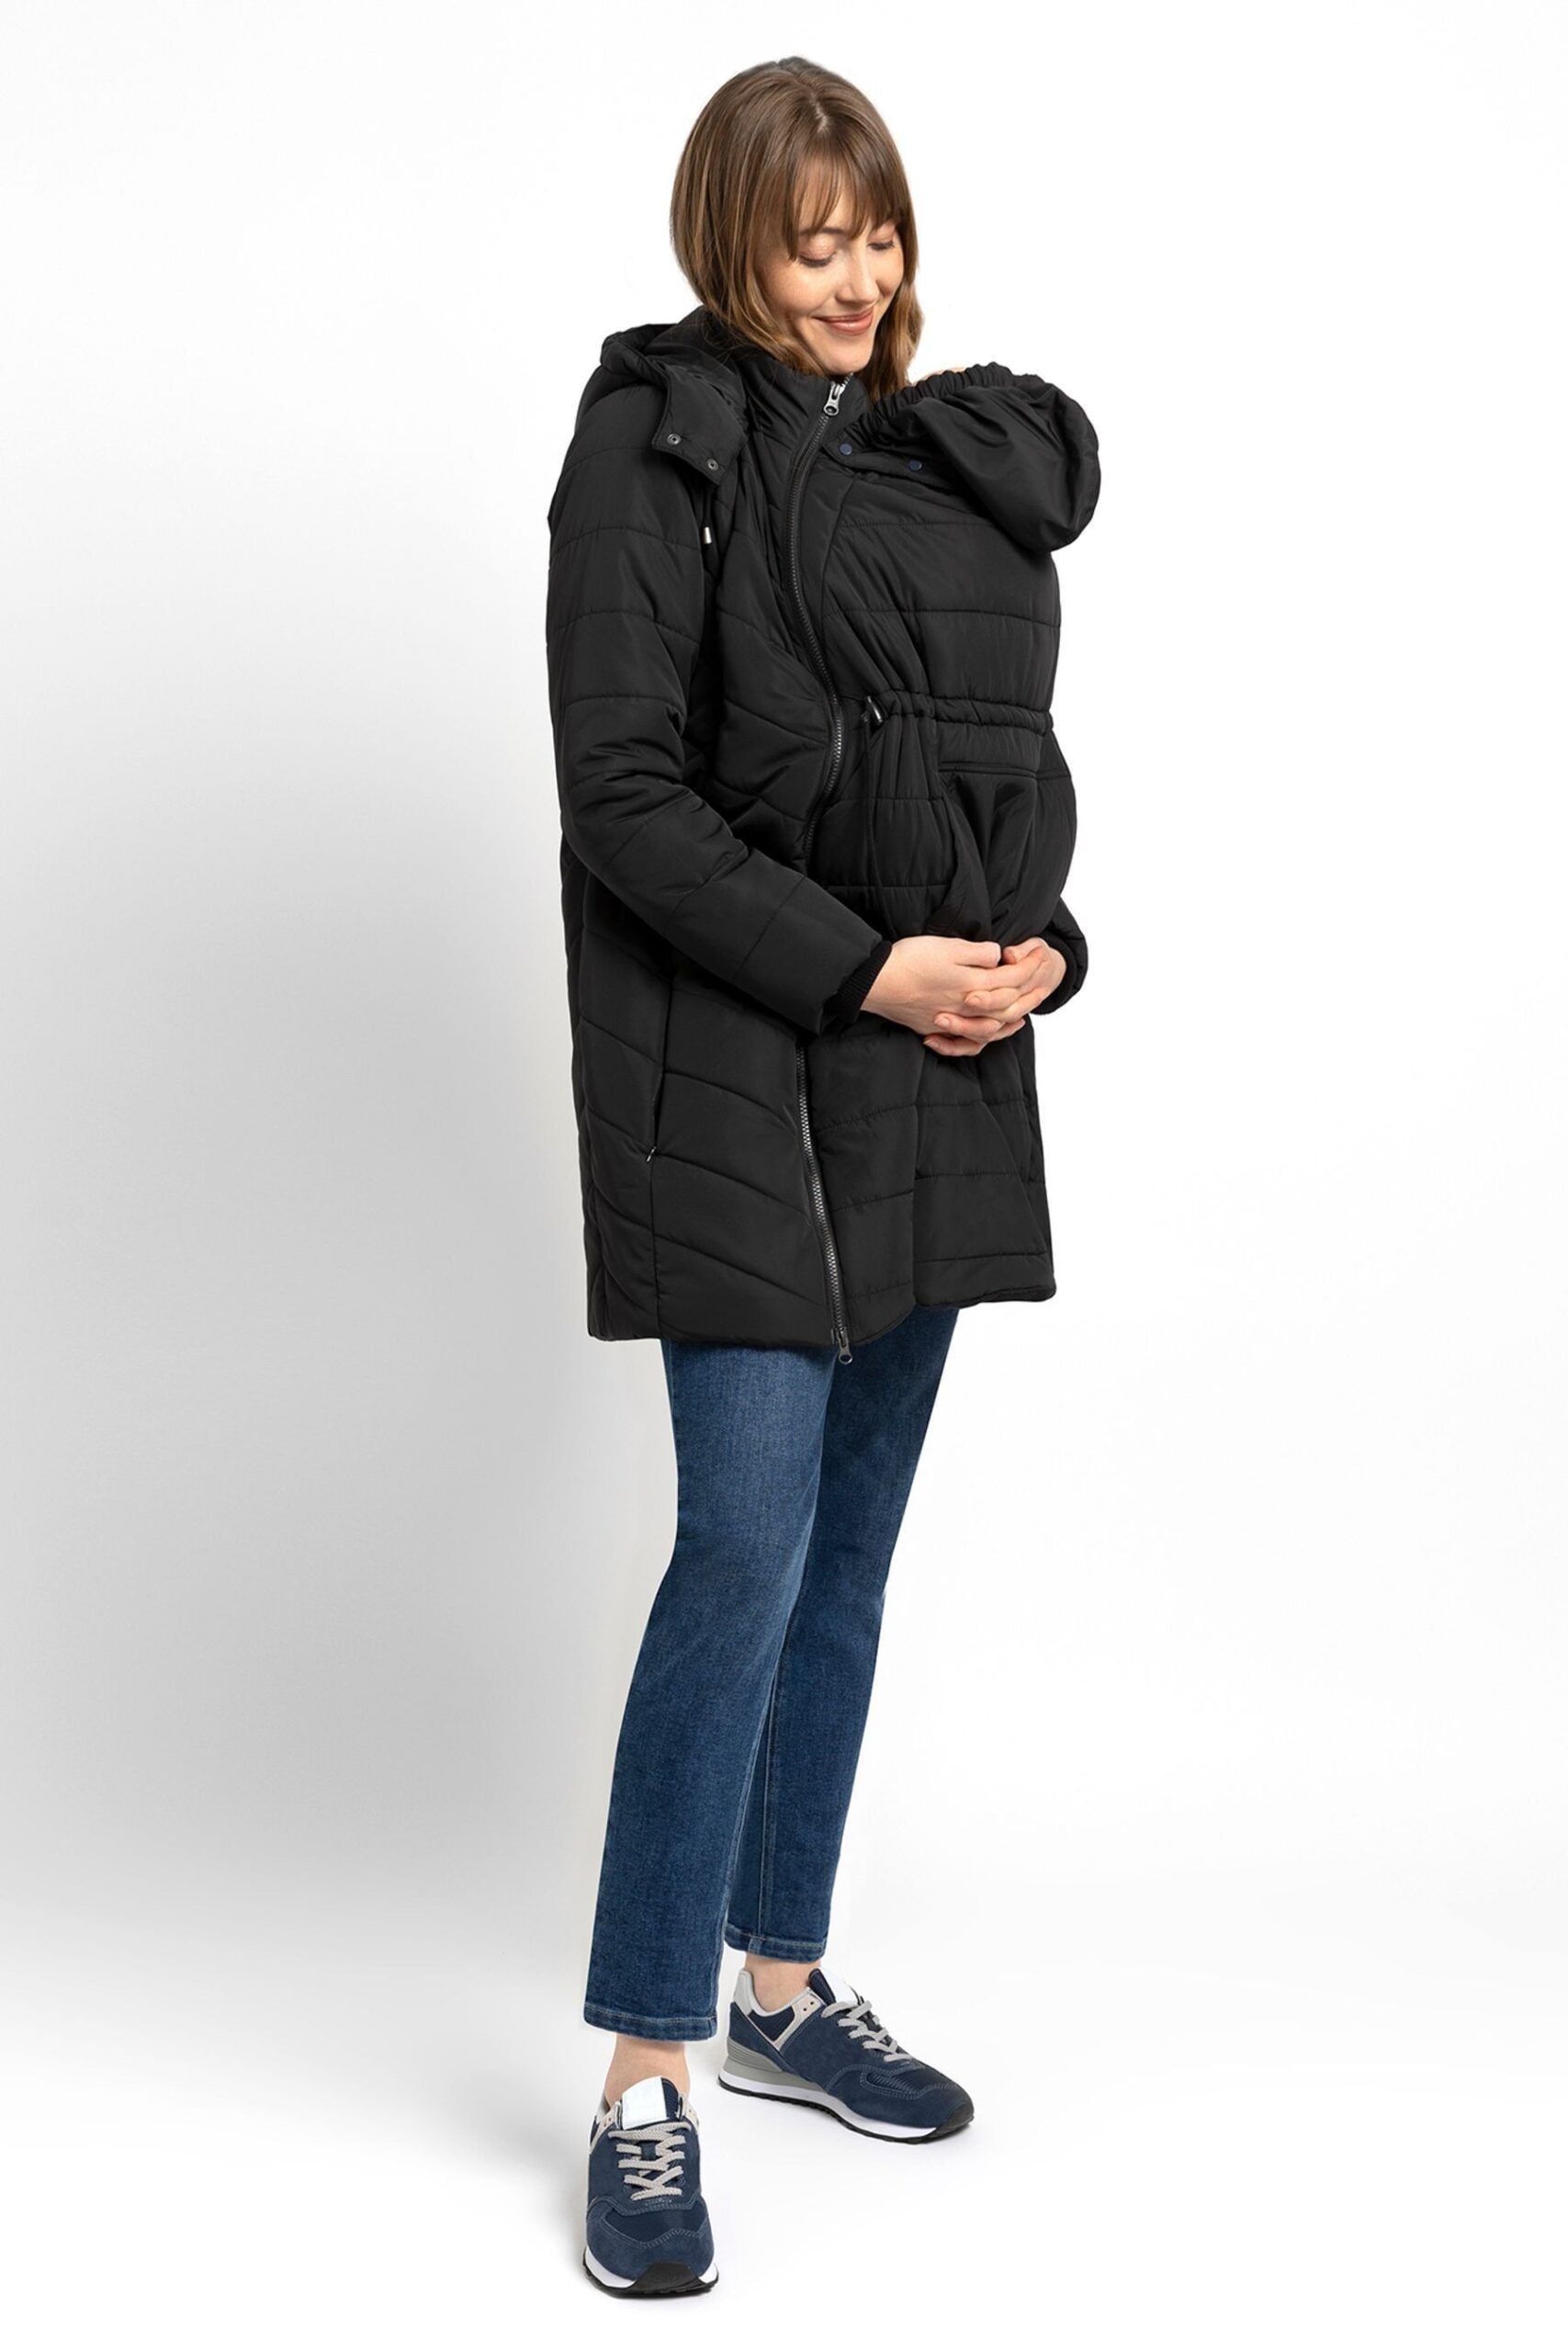 Maternity Jackets For Extra Warmth And
  Chic Looks